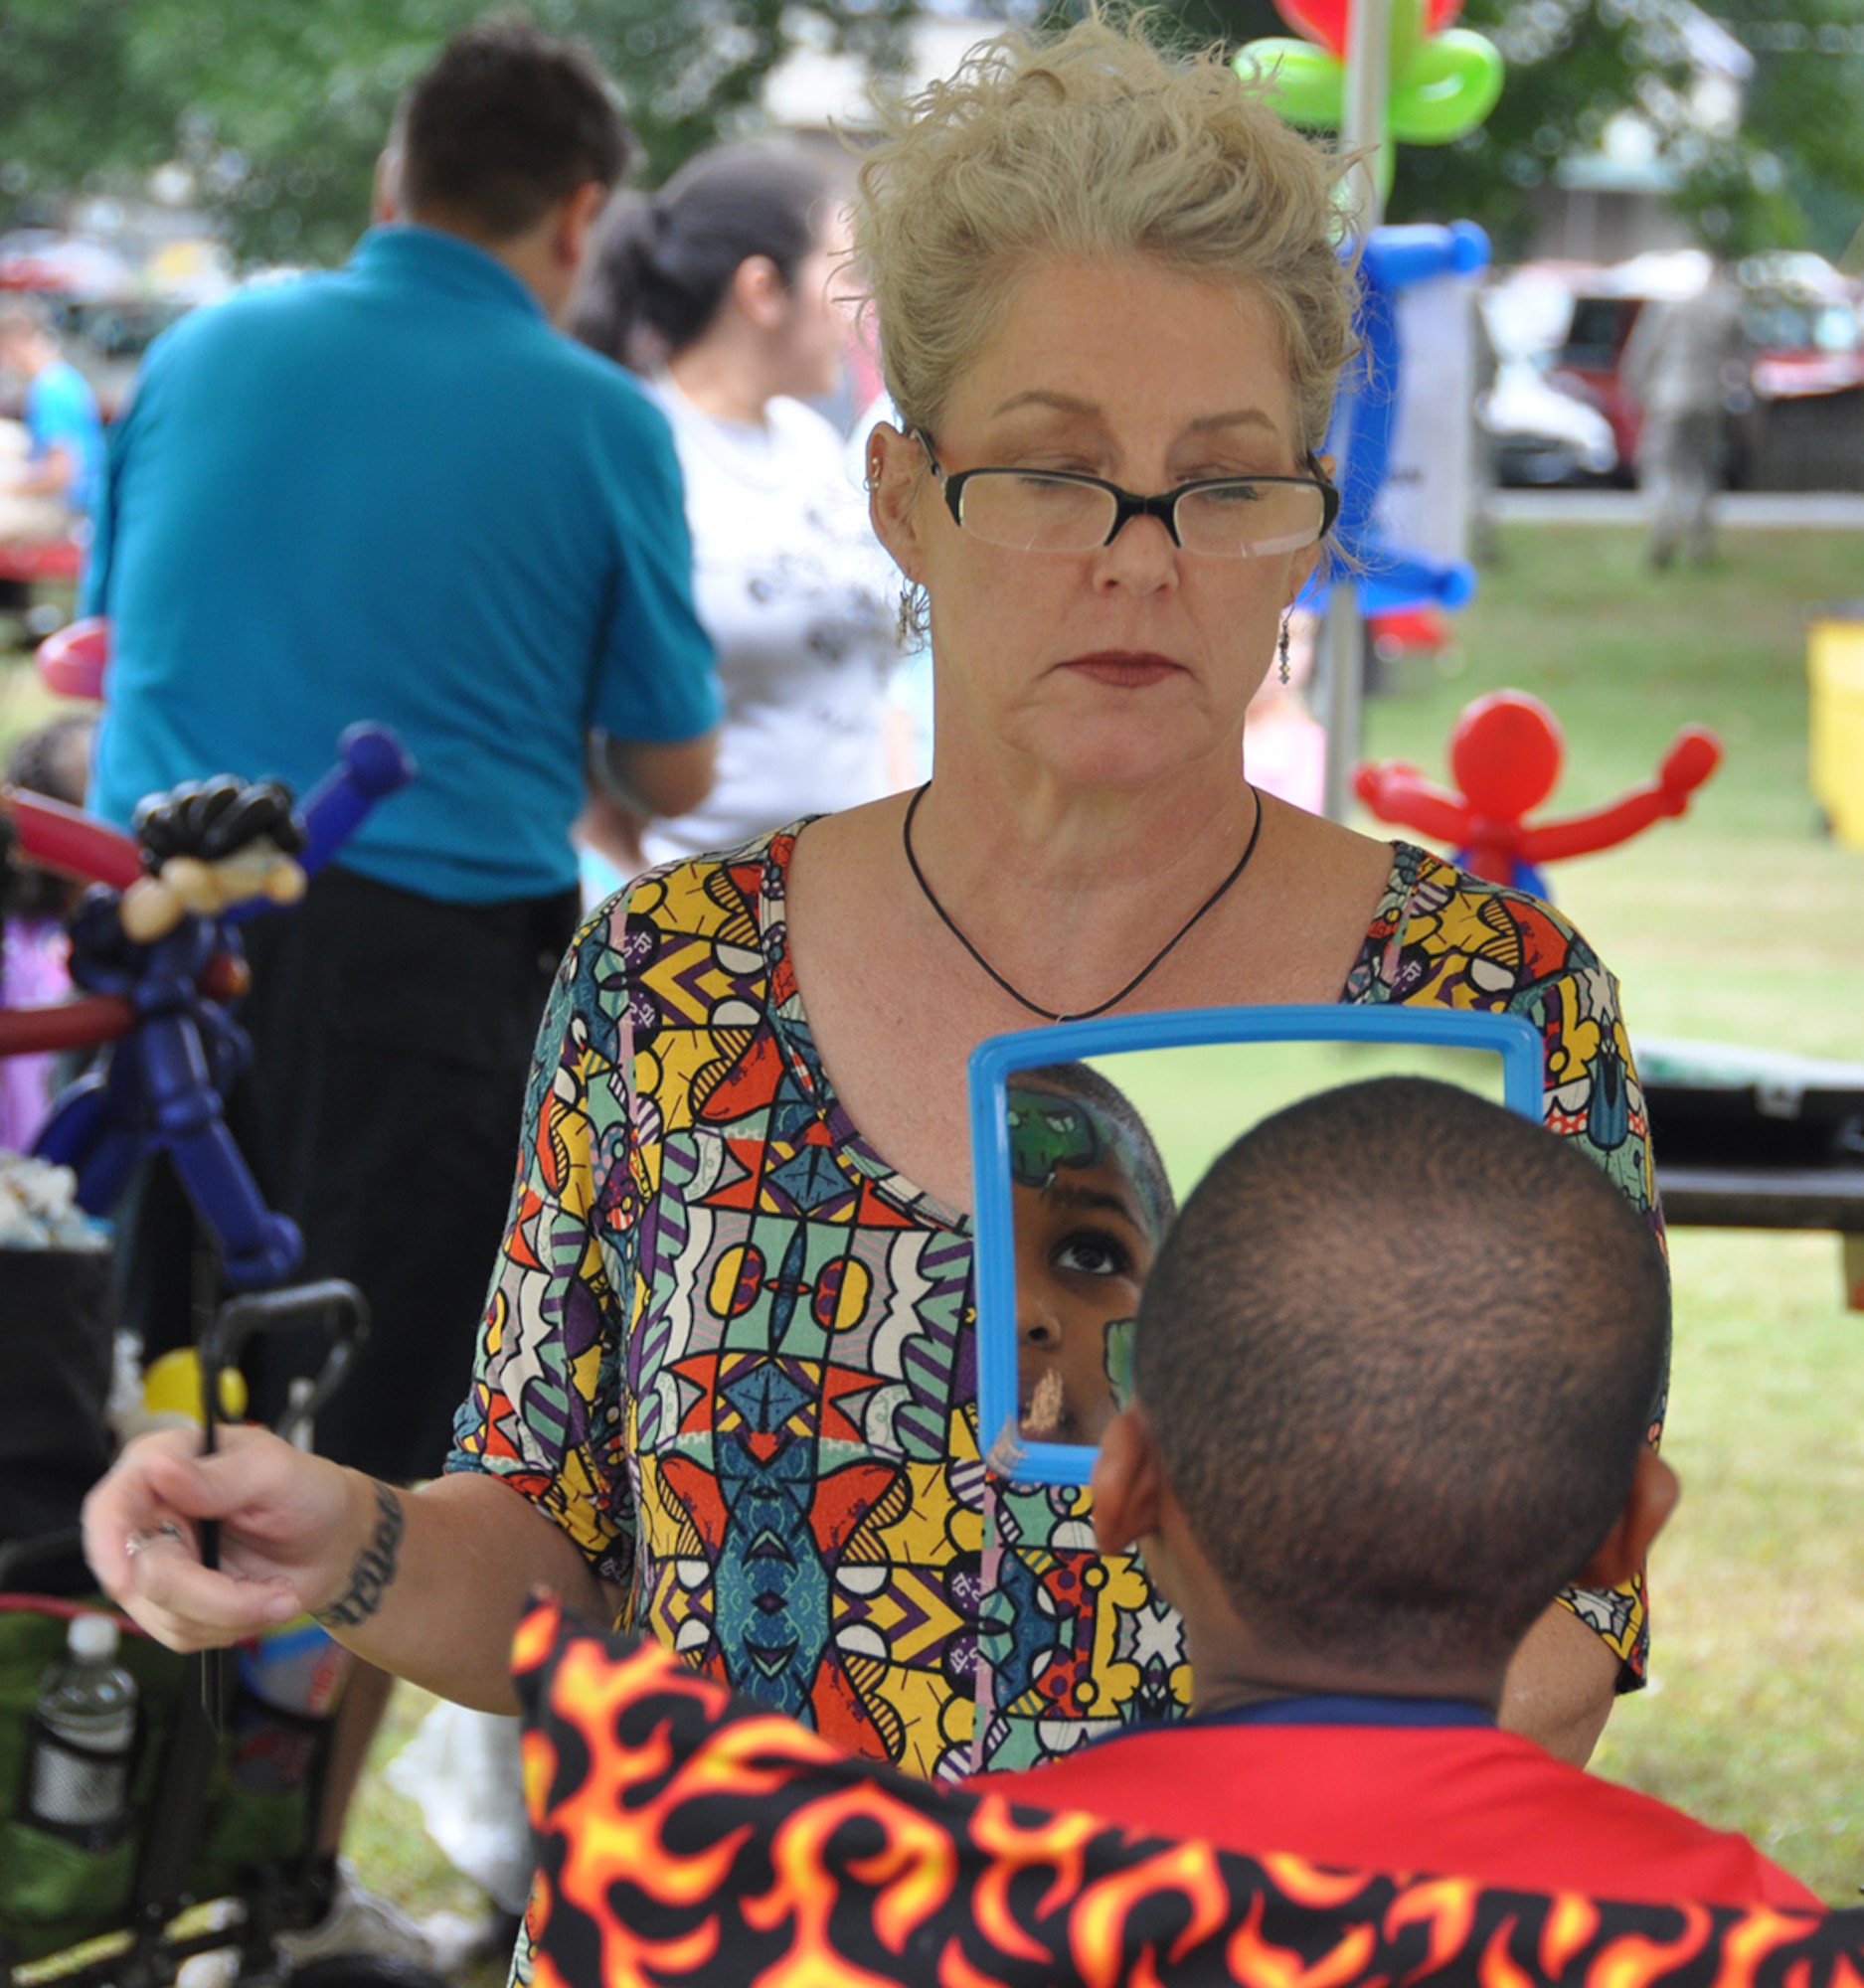 A face painter holds up a mirror to a young boy who just had his face painted at this year's Family Day Oct. 14, 2017 at Dobbins Air Reserve Base, Ga. Family Day is held here annually as a way of bringing families on base to see what their Reserve Citizen Airmen do on drill weekends. (U.S. Air Force photo/Master Sgt. James Branch)